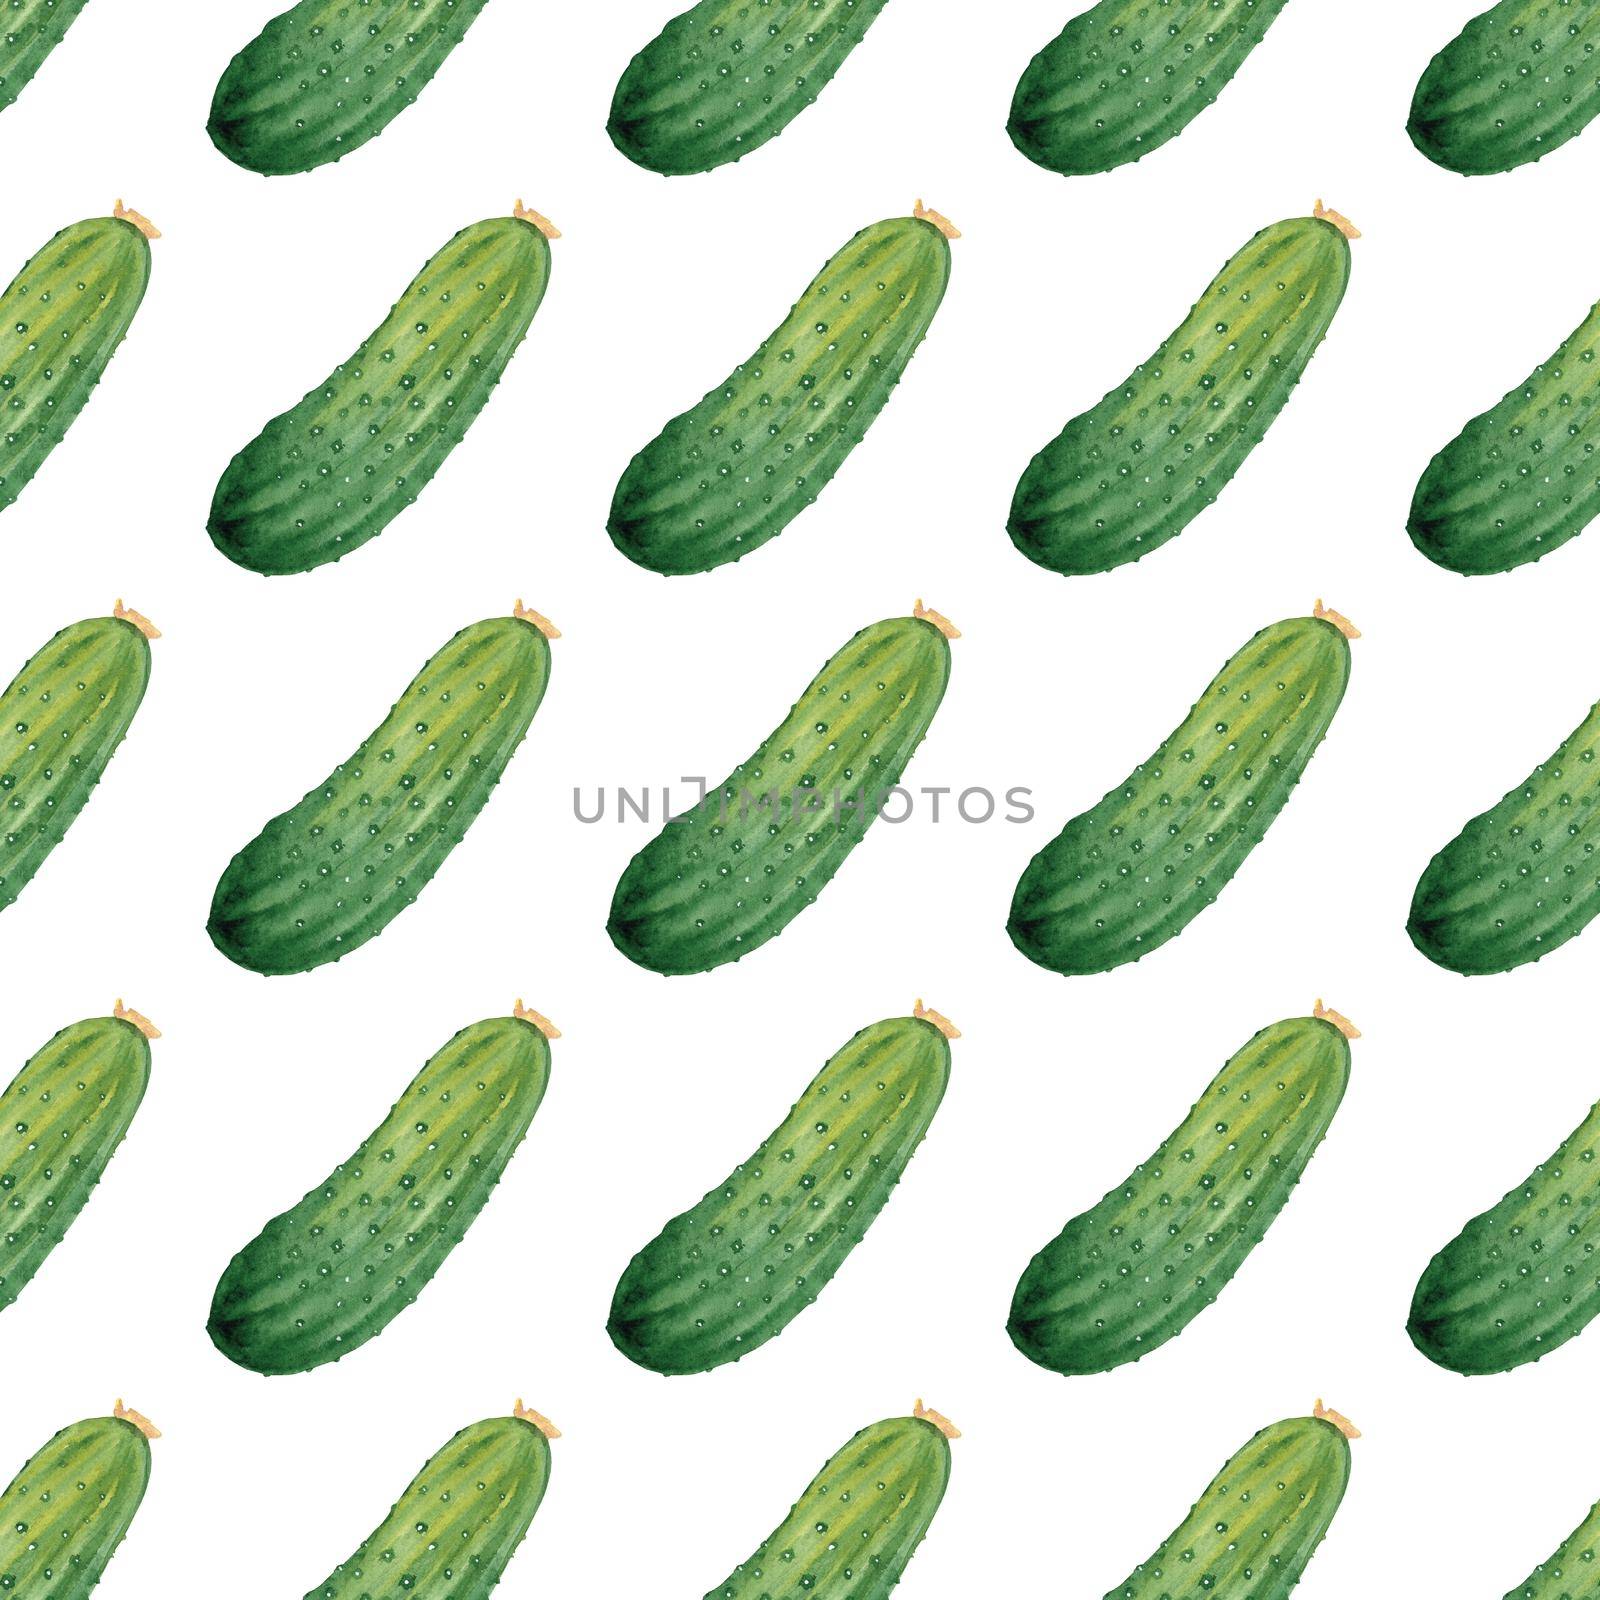 Watercolor green cucumbers seamless pattern on white background. Hand drawn vegetable print for fabric, textile, wrapping, wallpaper